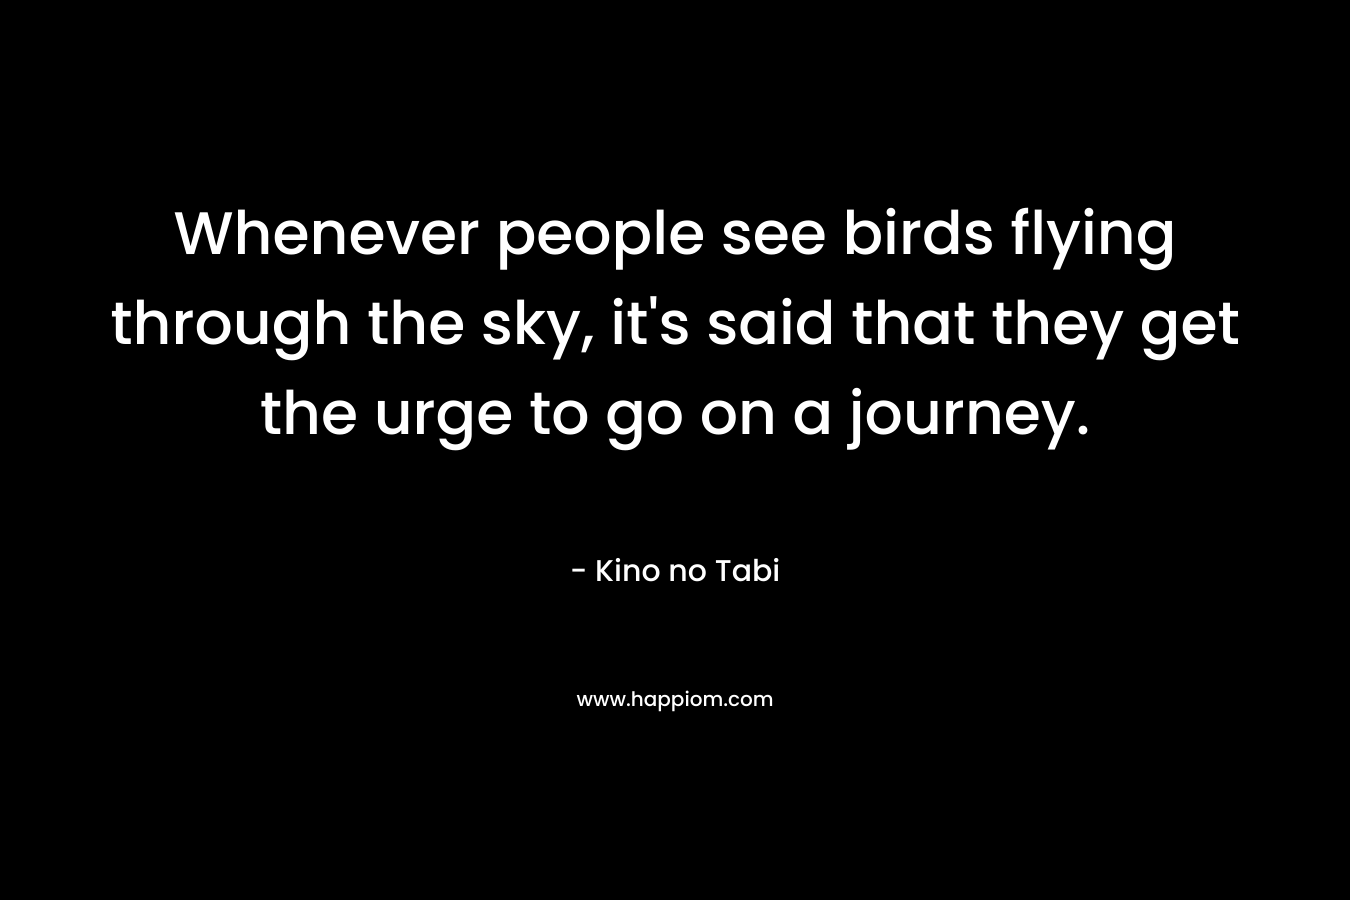 Whenever people see birds flying through the sky, it's said that they get the urge to go on a journey.